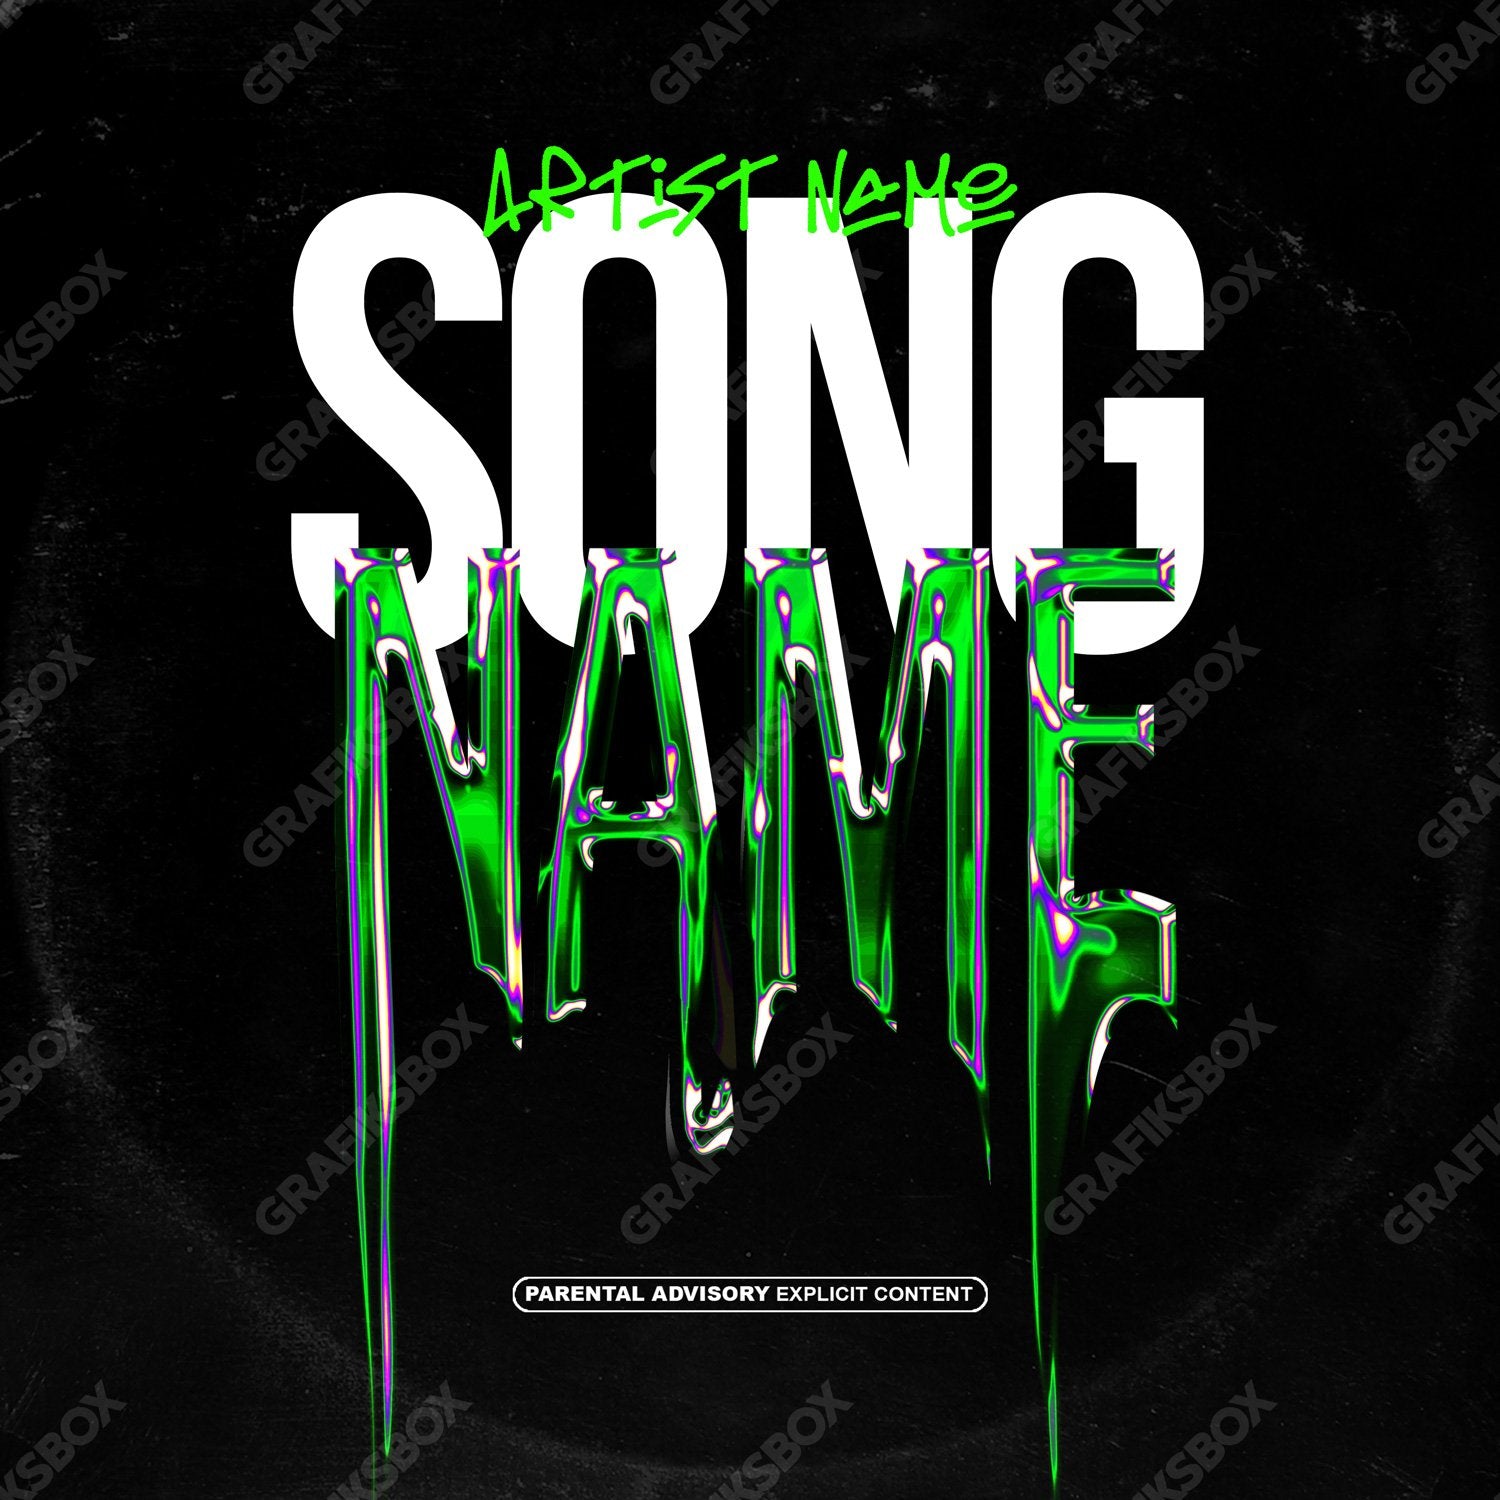 The Slime premade cover art